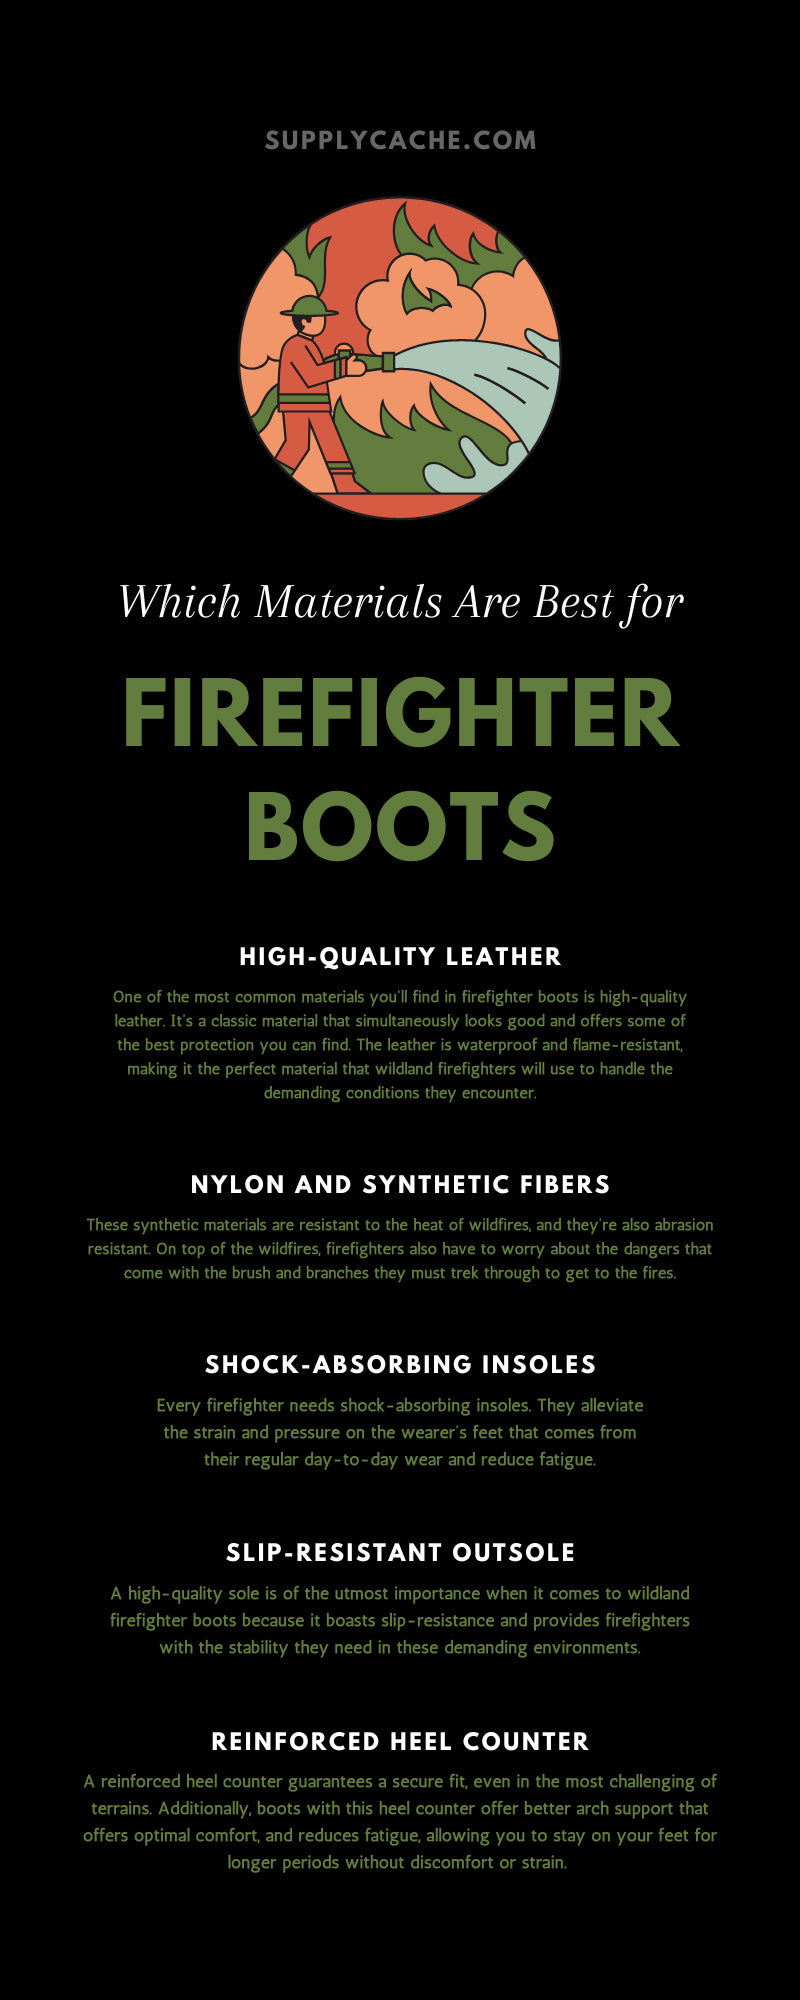 Which Materials Are Best for Firefighter Boots